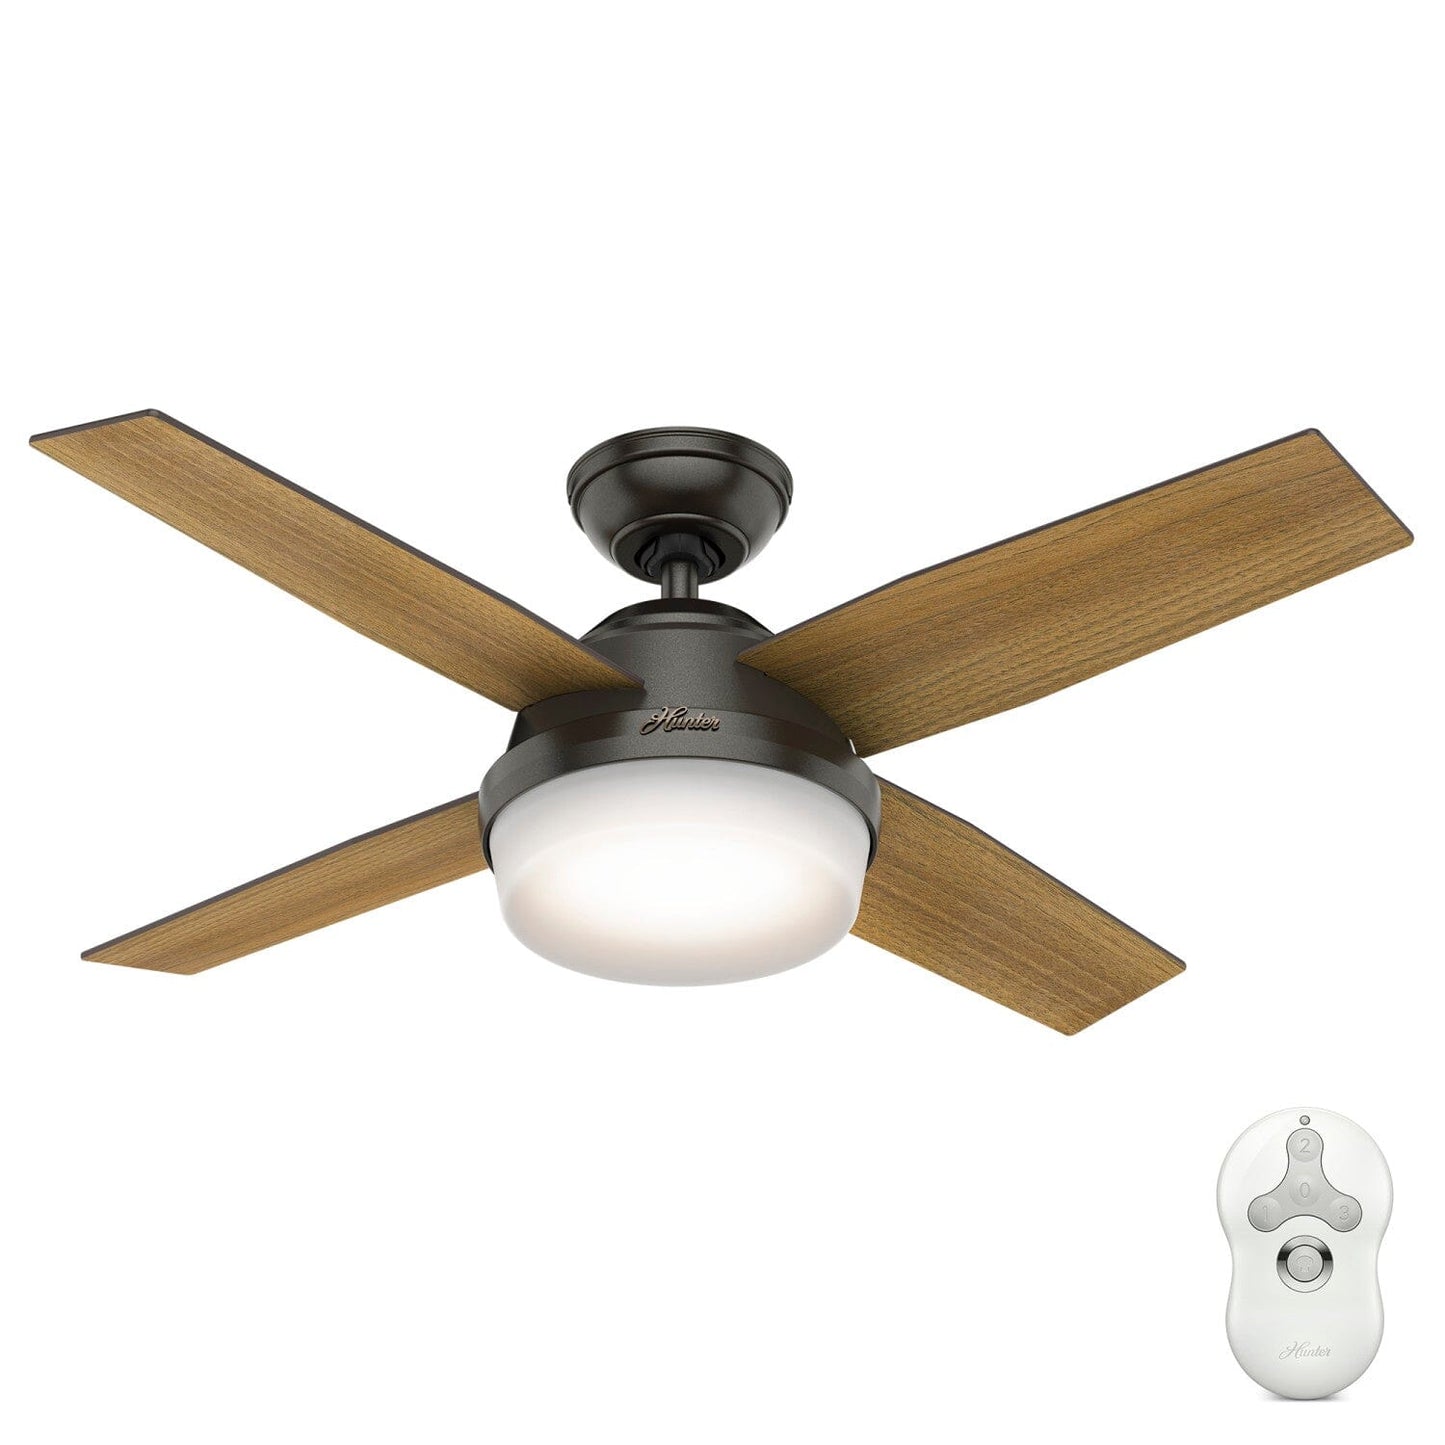 Dempsey with Light 44 inch Ceiling Fans Hunter Noble Bronze - Mid Century Walnut 